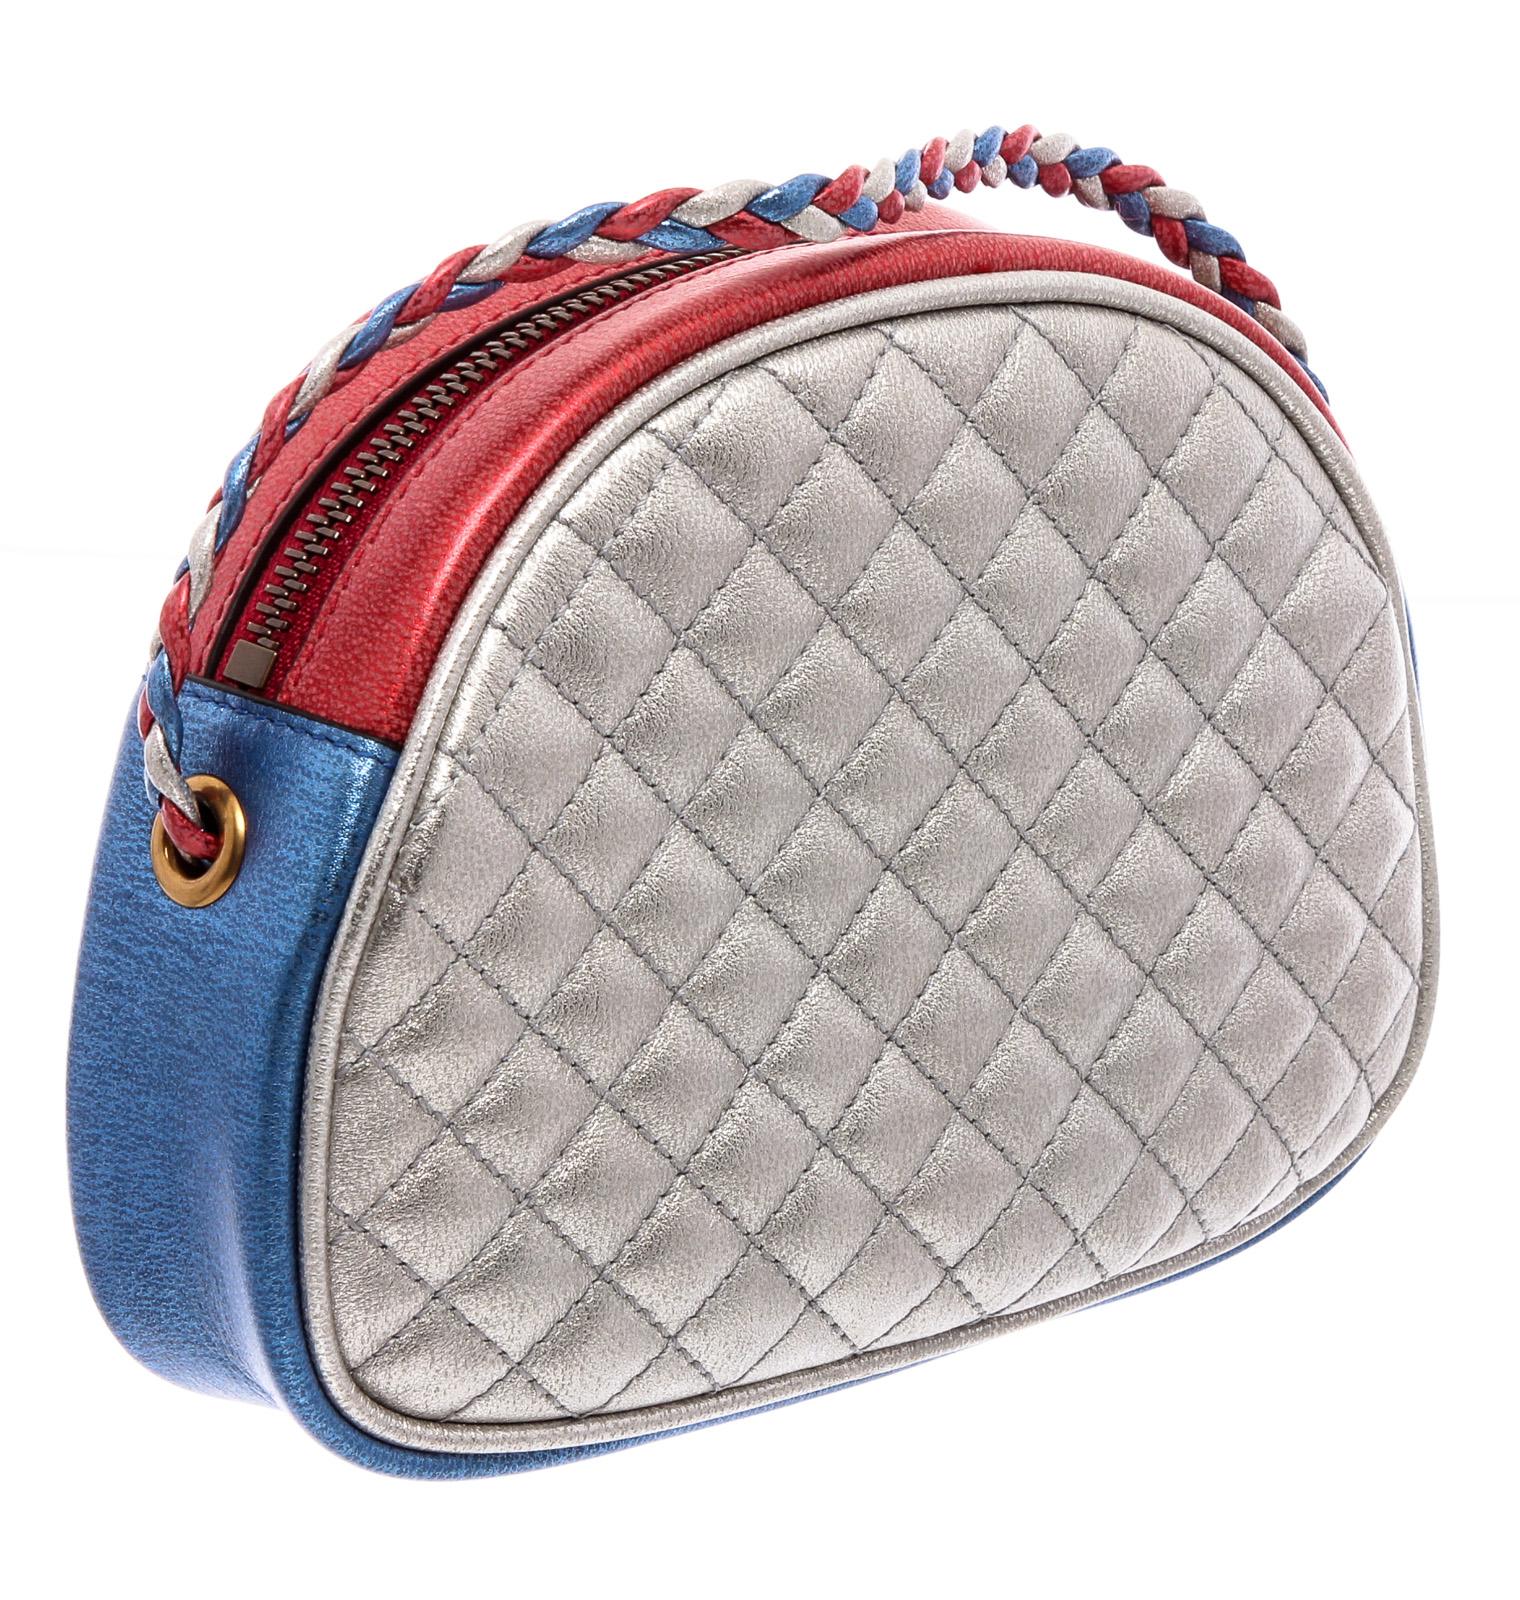 Gucci Mini Trapuntata crossbody bag crafted of textured calfskin leather in laminated red and blue with silver piping. The shoulder bag features a waist length braided shoulder strap and has combined its horse bit and interlocked G insignias in gold